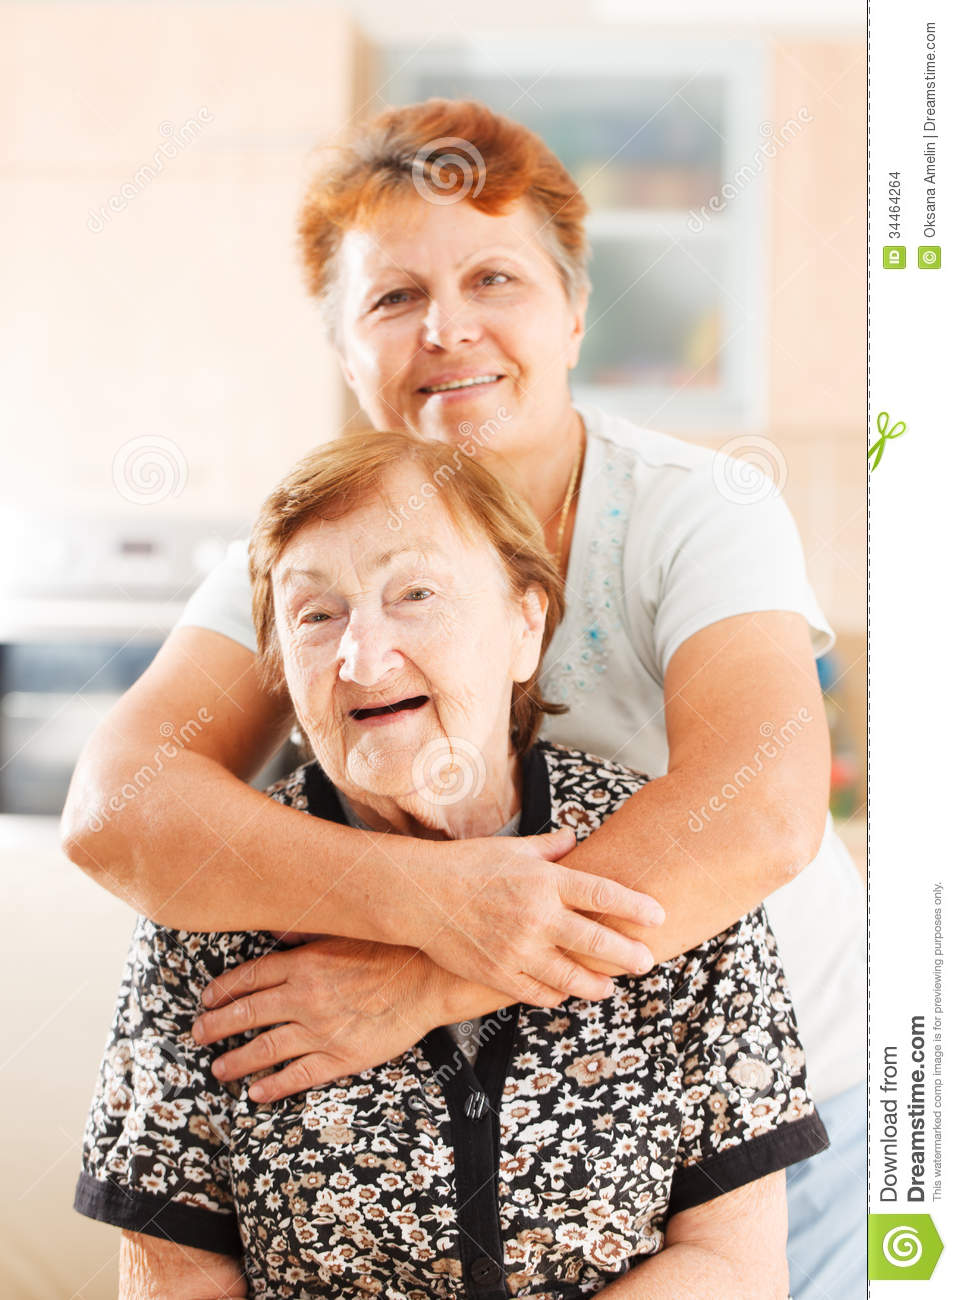 People Hugging Clipart Hugging Each Other 